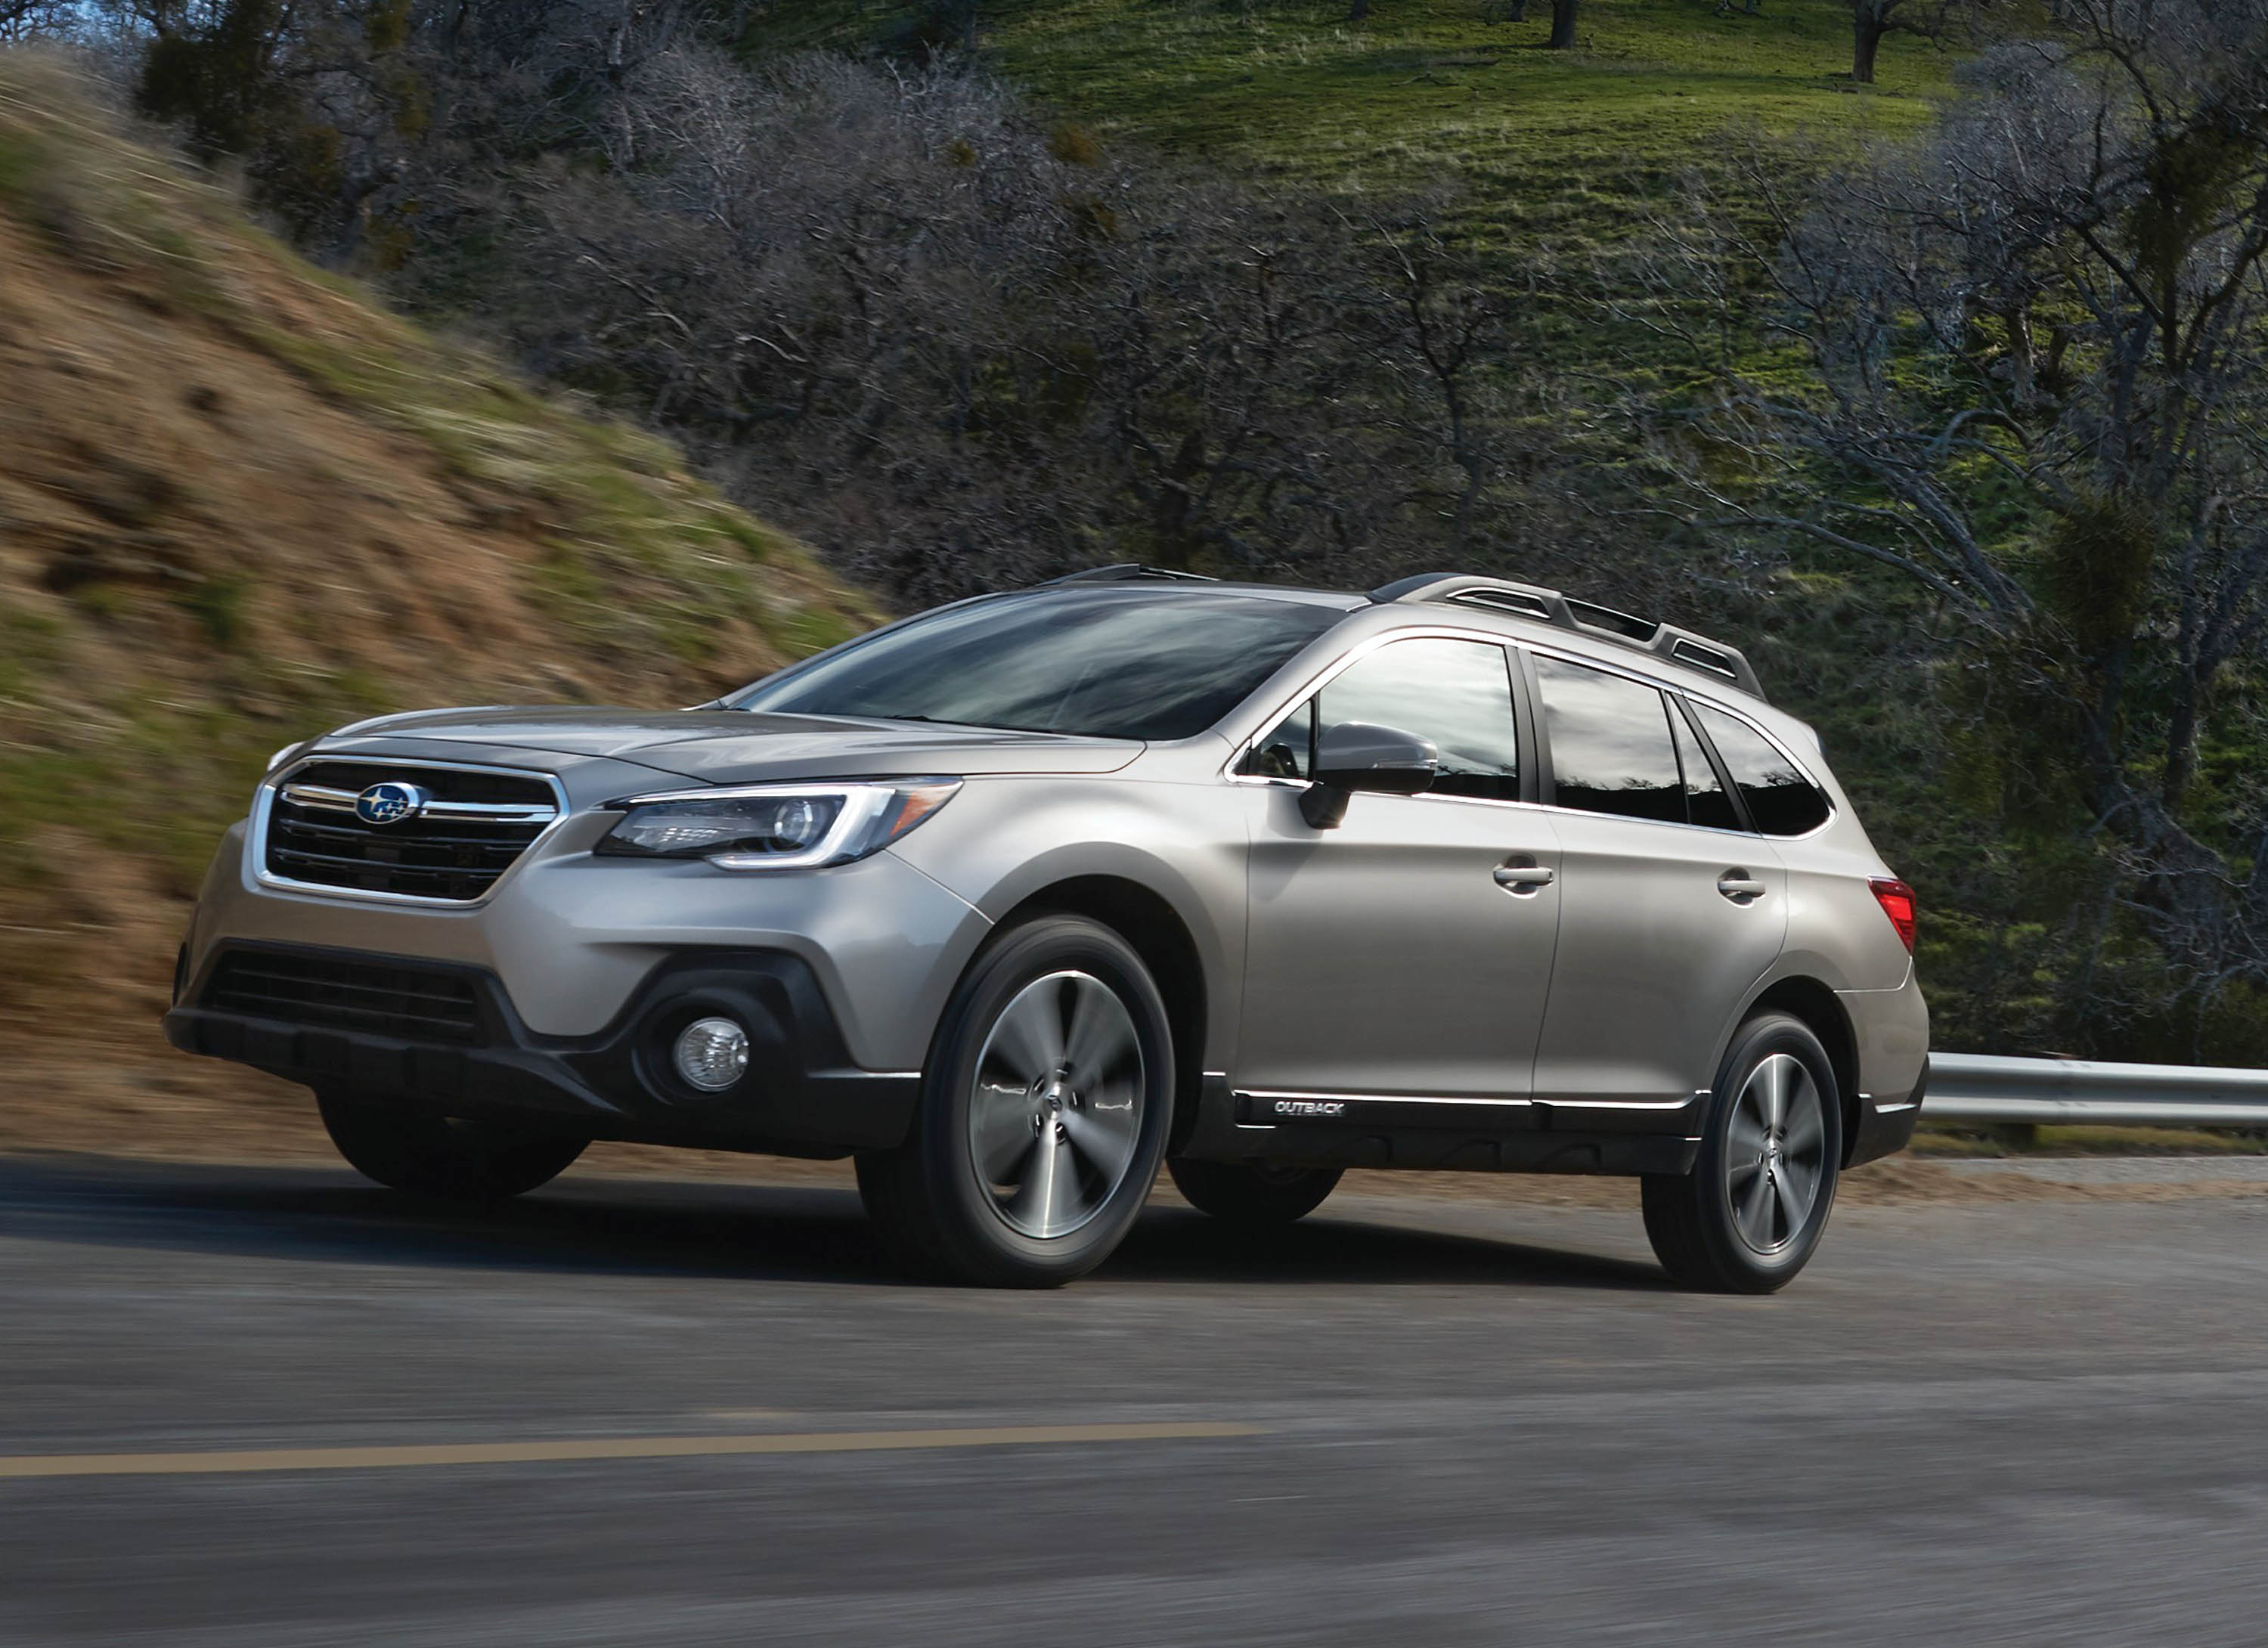 Thats So Gay 2018 Subaru Outback Is The Lesbian Classic That Now Everyone Wants Gaywheels 